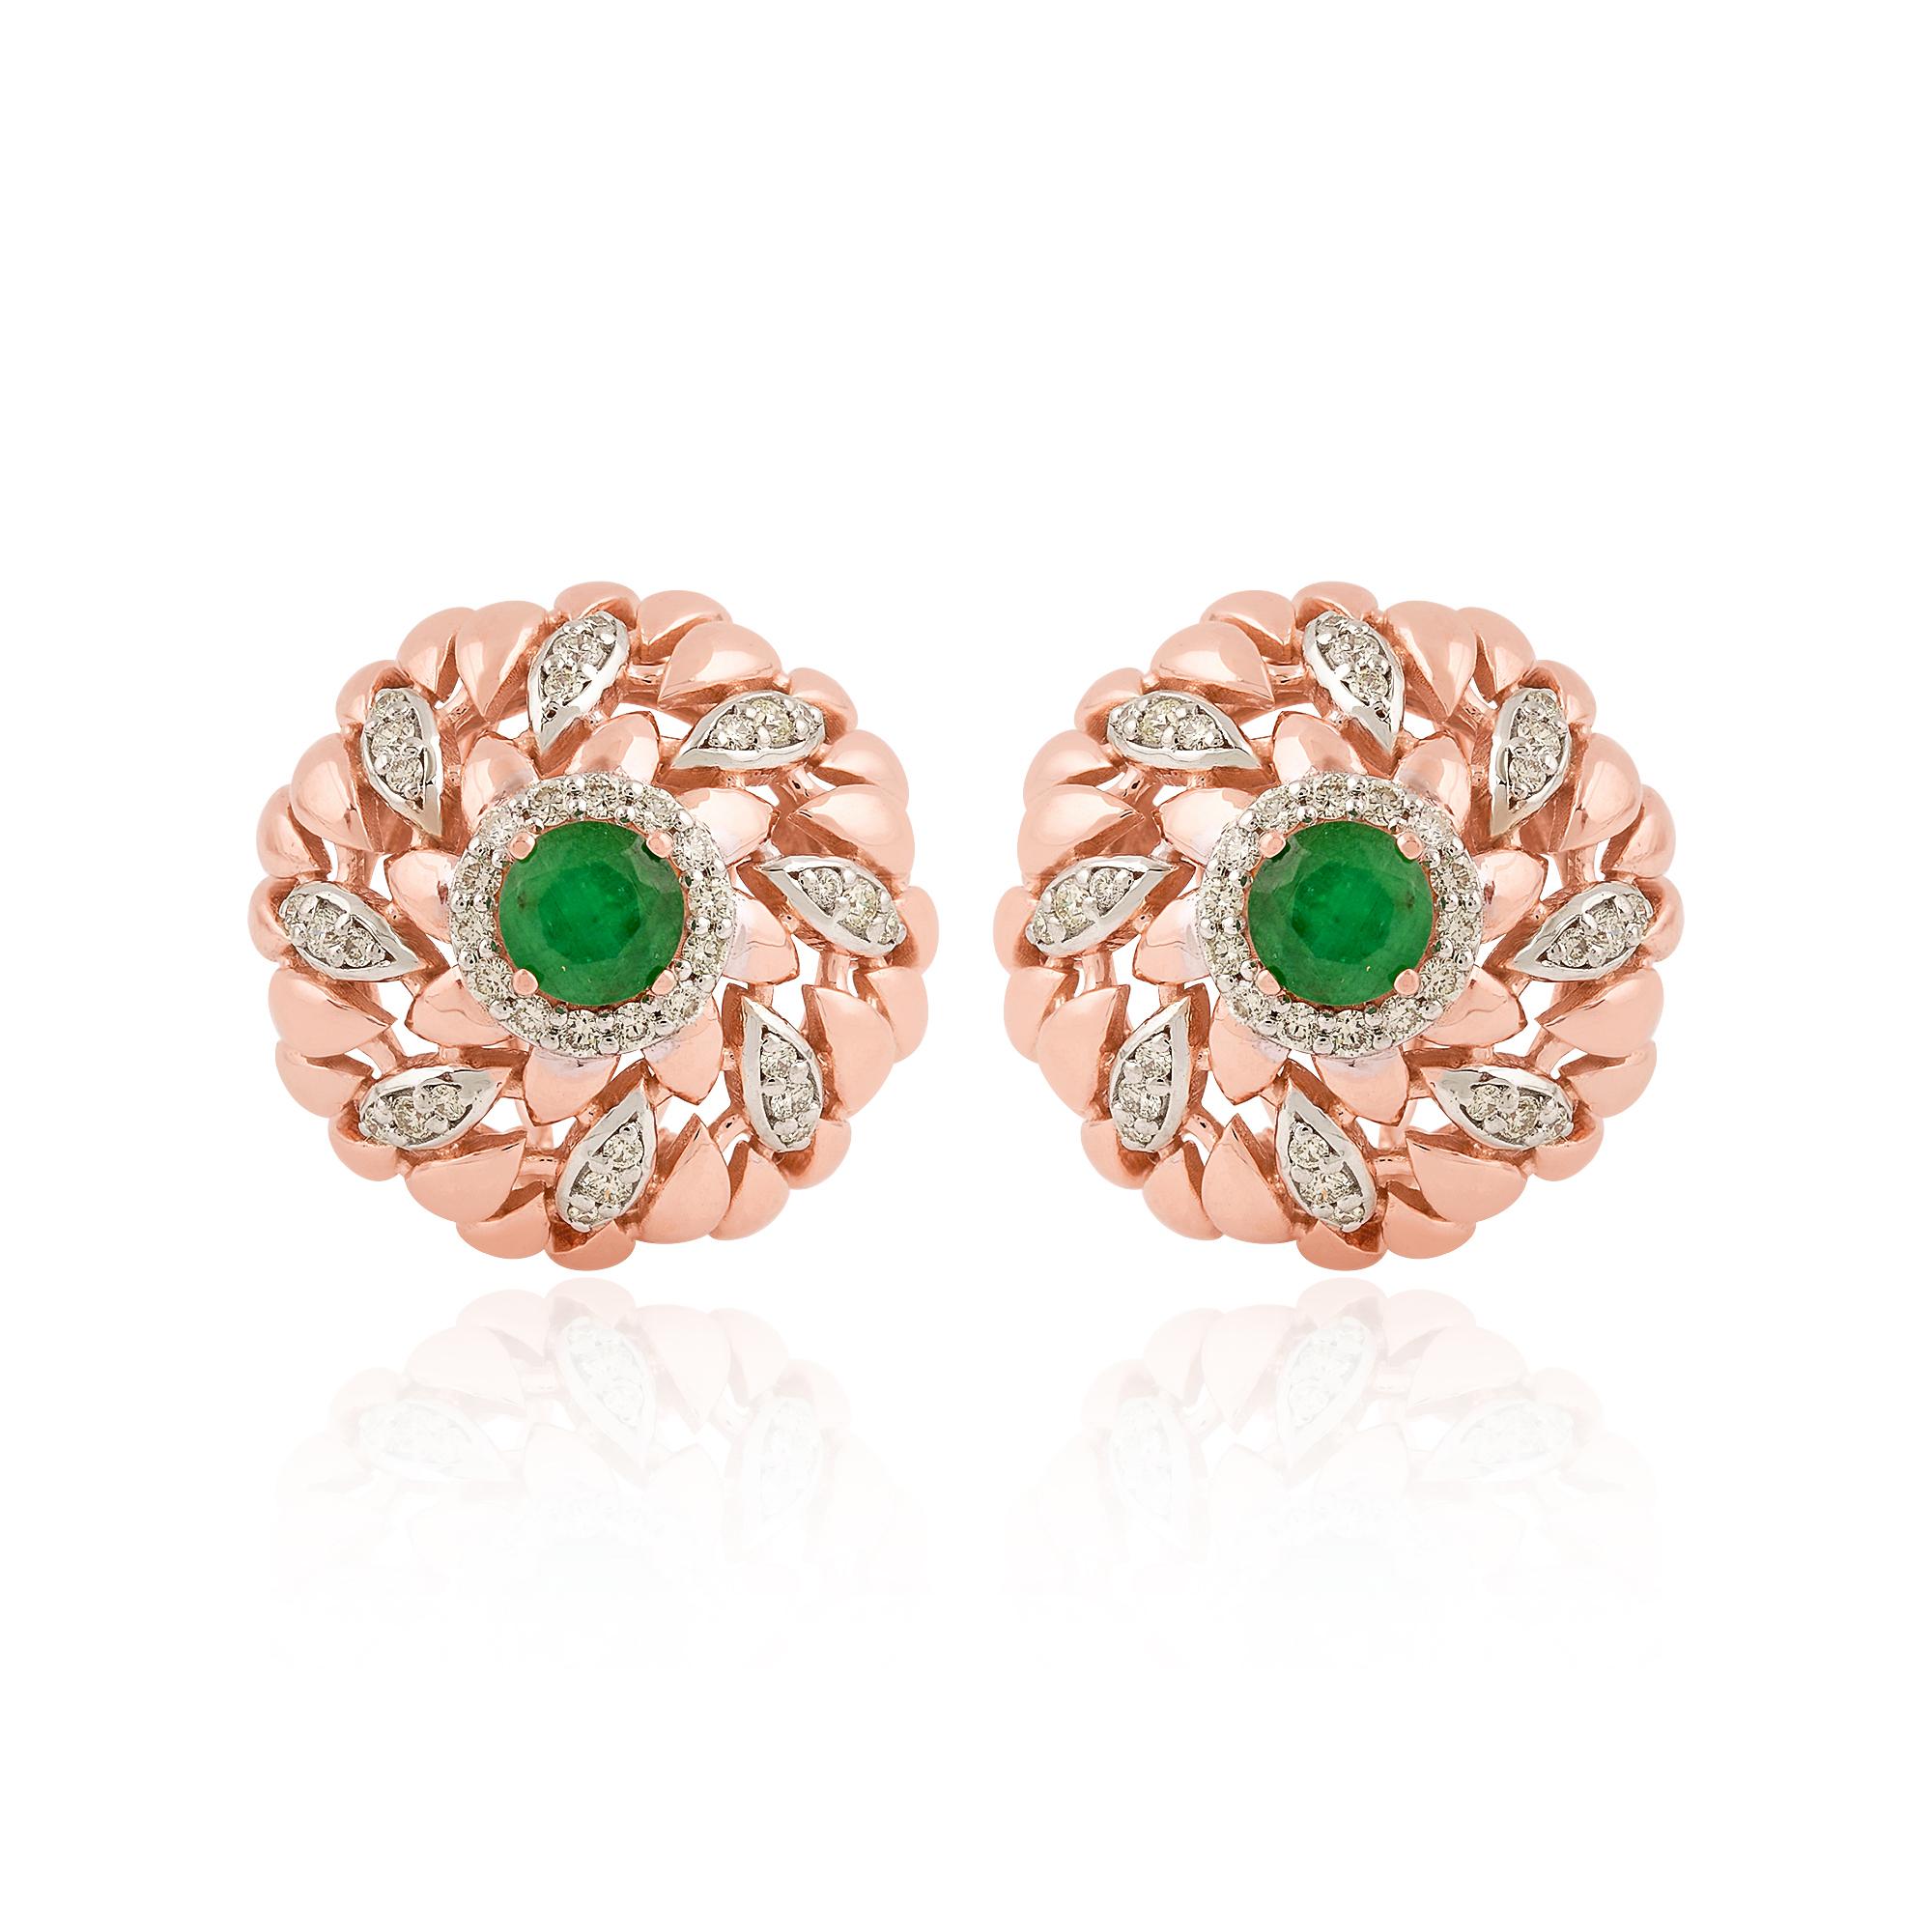 Modern Natural Emerald Gemstone Stud Earrings Diamond Pave Solid 14k Rose Gold Jewelry For Sale